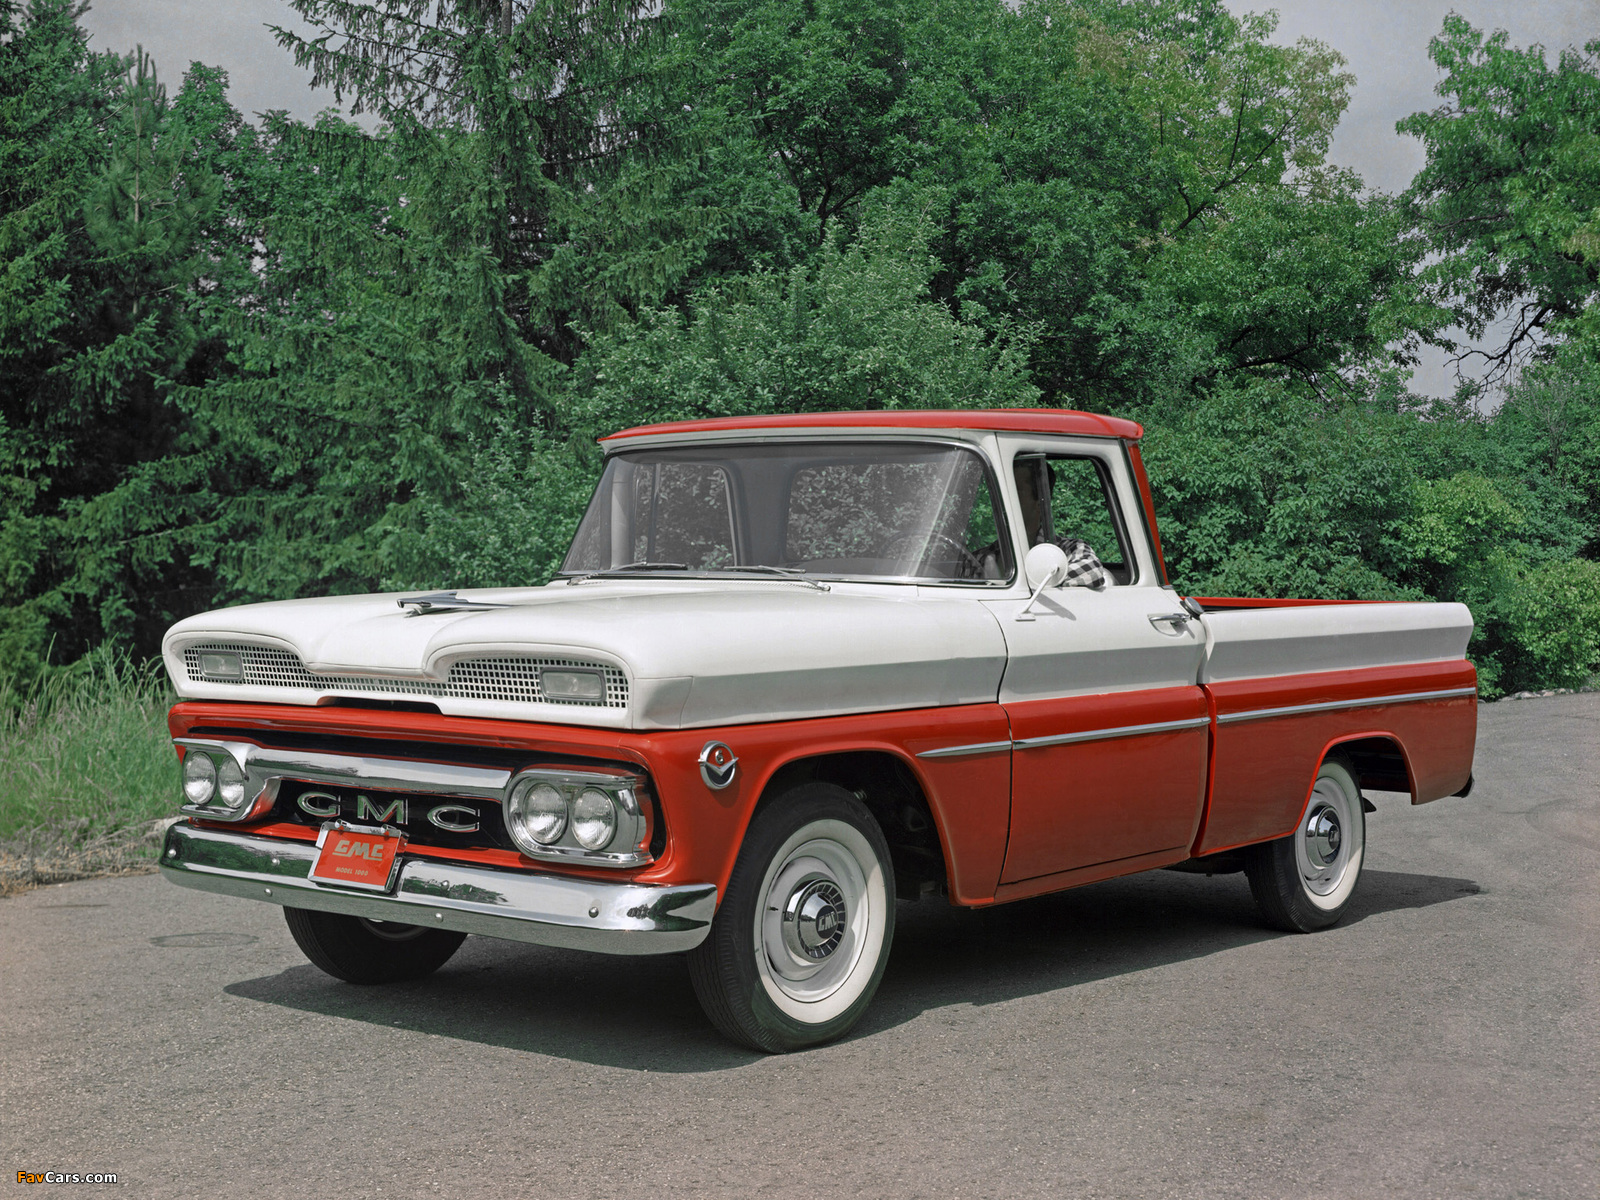 GMC 1000 ½-ton Wideside Pickup Truck 1960 images (1600 x 1200)